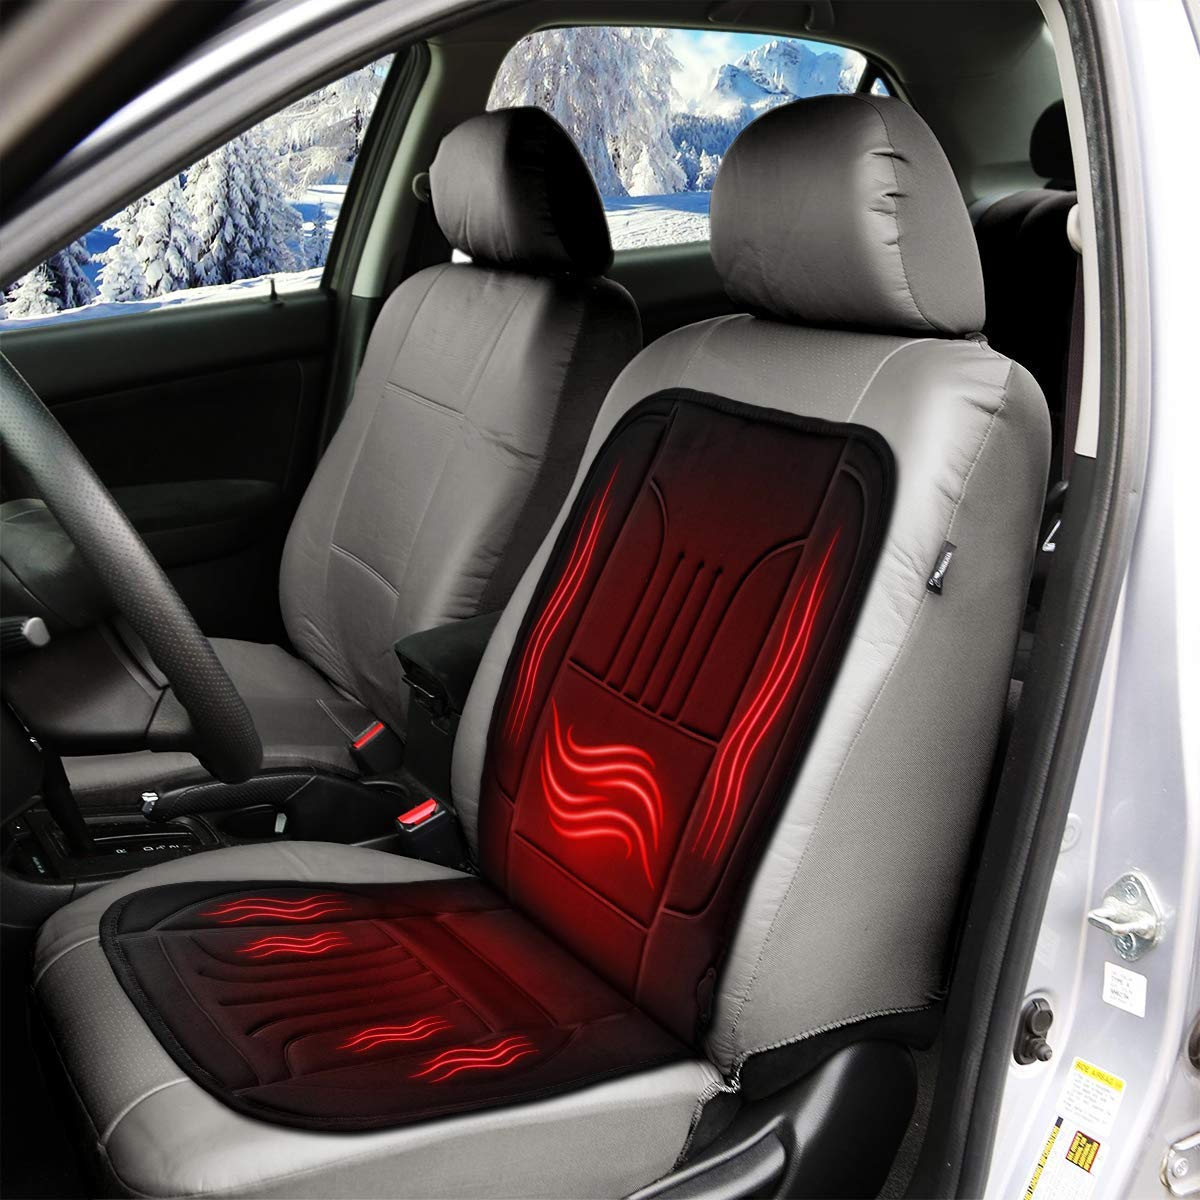 12V Heated Seat Cushion Fochutech Car Seat Warmer 3 in 1 Cooling and